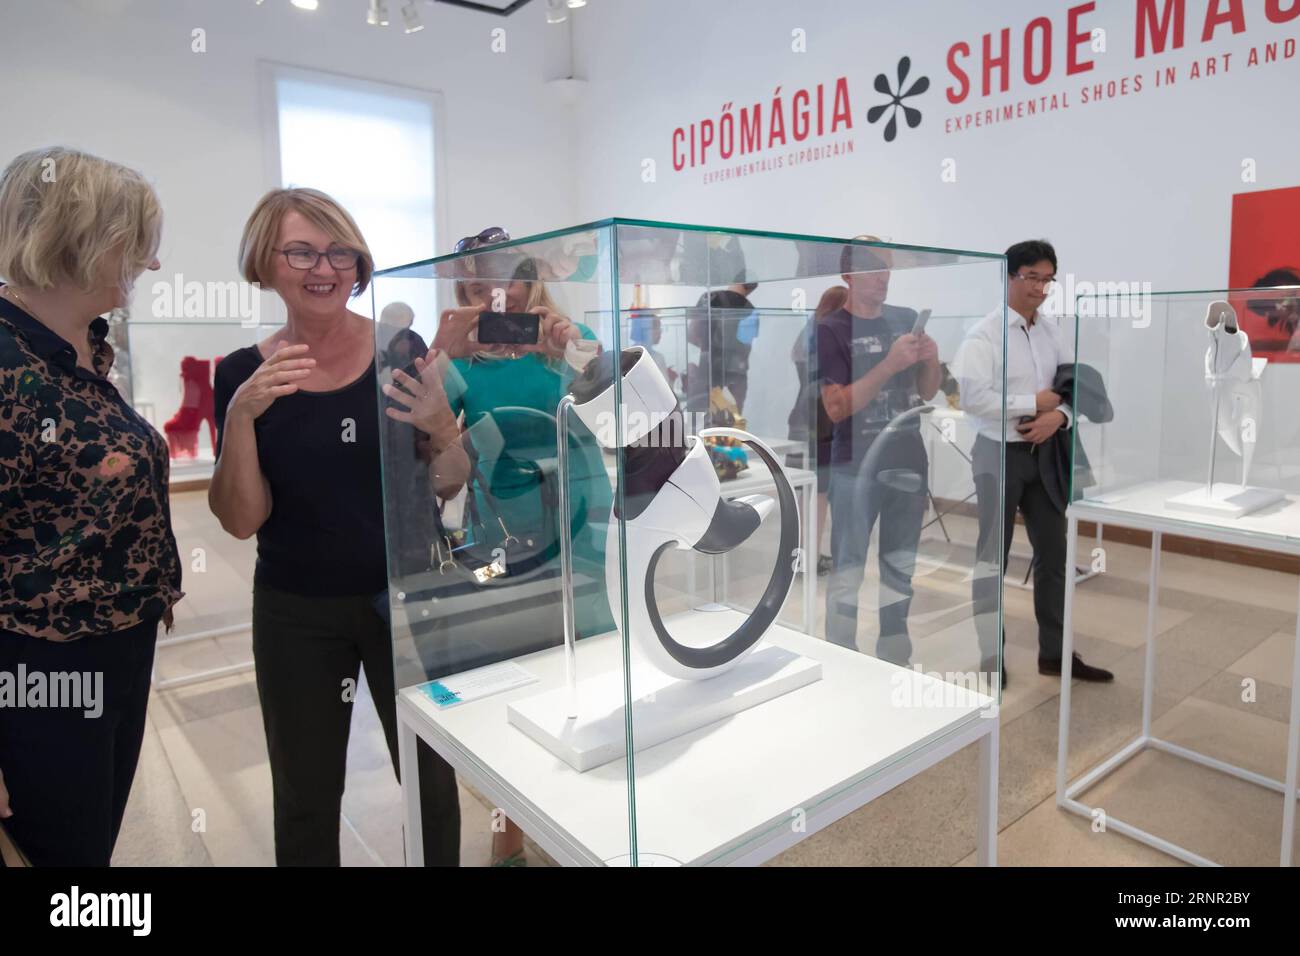 (170915) -- BUDAPEST, Sept. 15, 2017 -- Artwork Ring by Dutch designer Peter Popps is seen on display at the media preview of Shoe Magic experimental shoe design exhibition in Budapest, Hungary on Sept. 14, 2017. The exhibits belong to the Hague Virtual Shoe Museum. ) (djj) HUNGARY-BUDAPEST-SHOE DESIGN-EXHIBITION AttilaxVolgyi PUBLICATIONxNOTxINxCHN Stock Photo